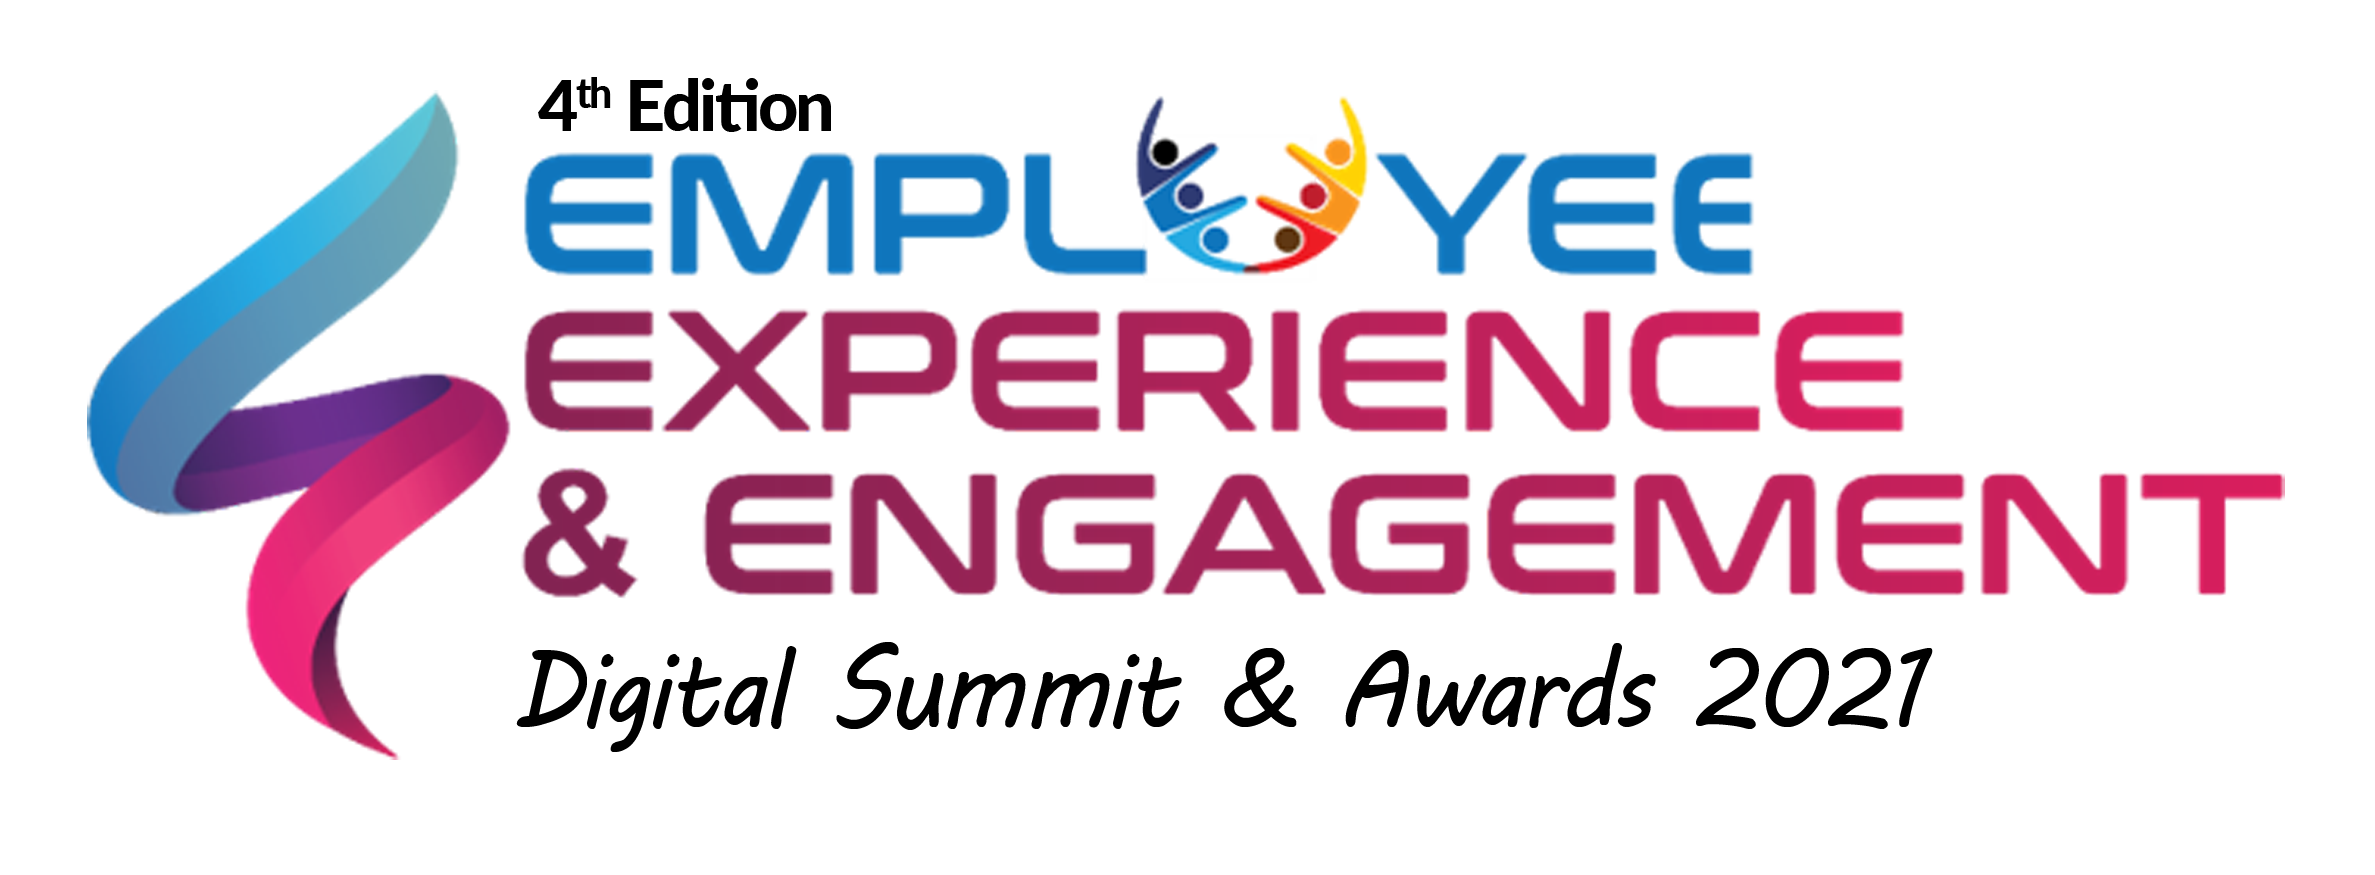 4th Edition Employee Experience & Engagement Summit & Awards 2021